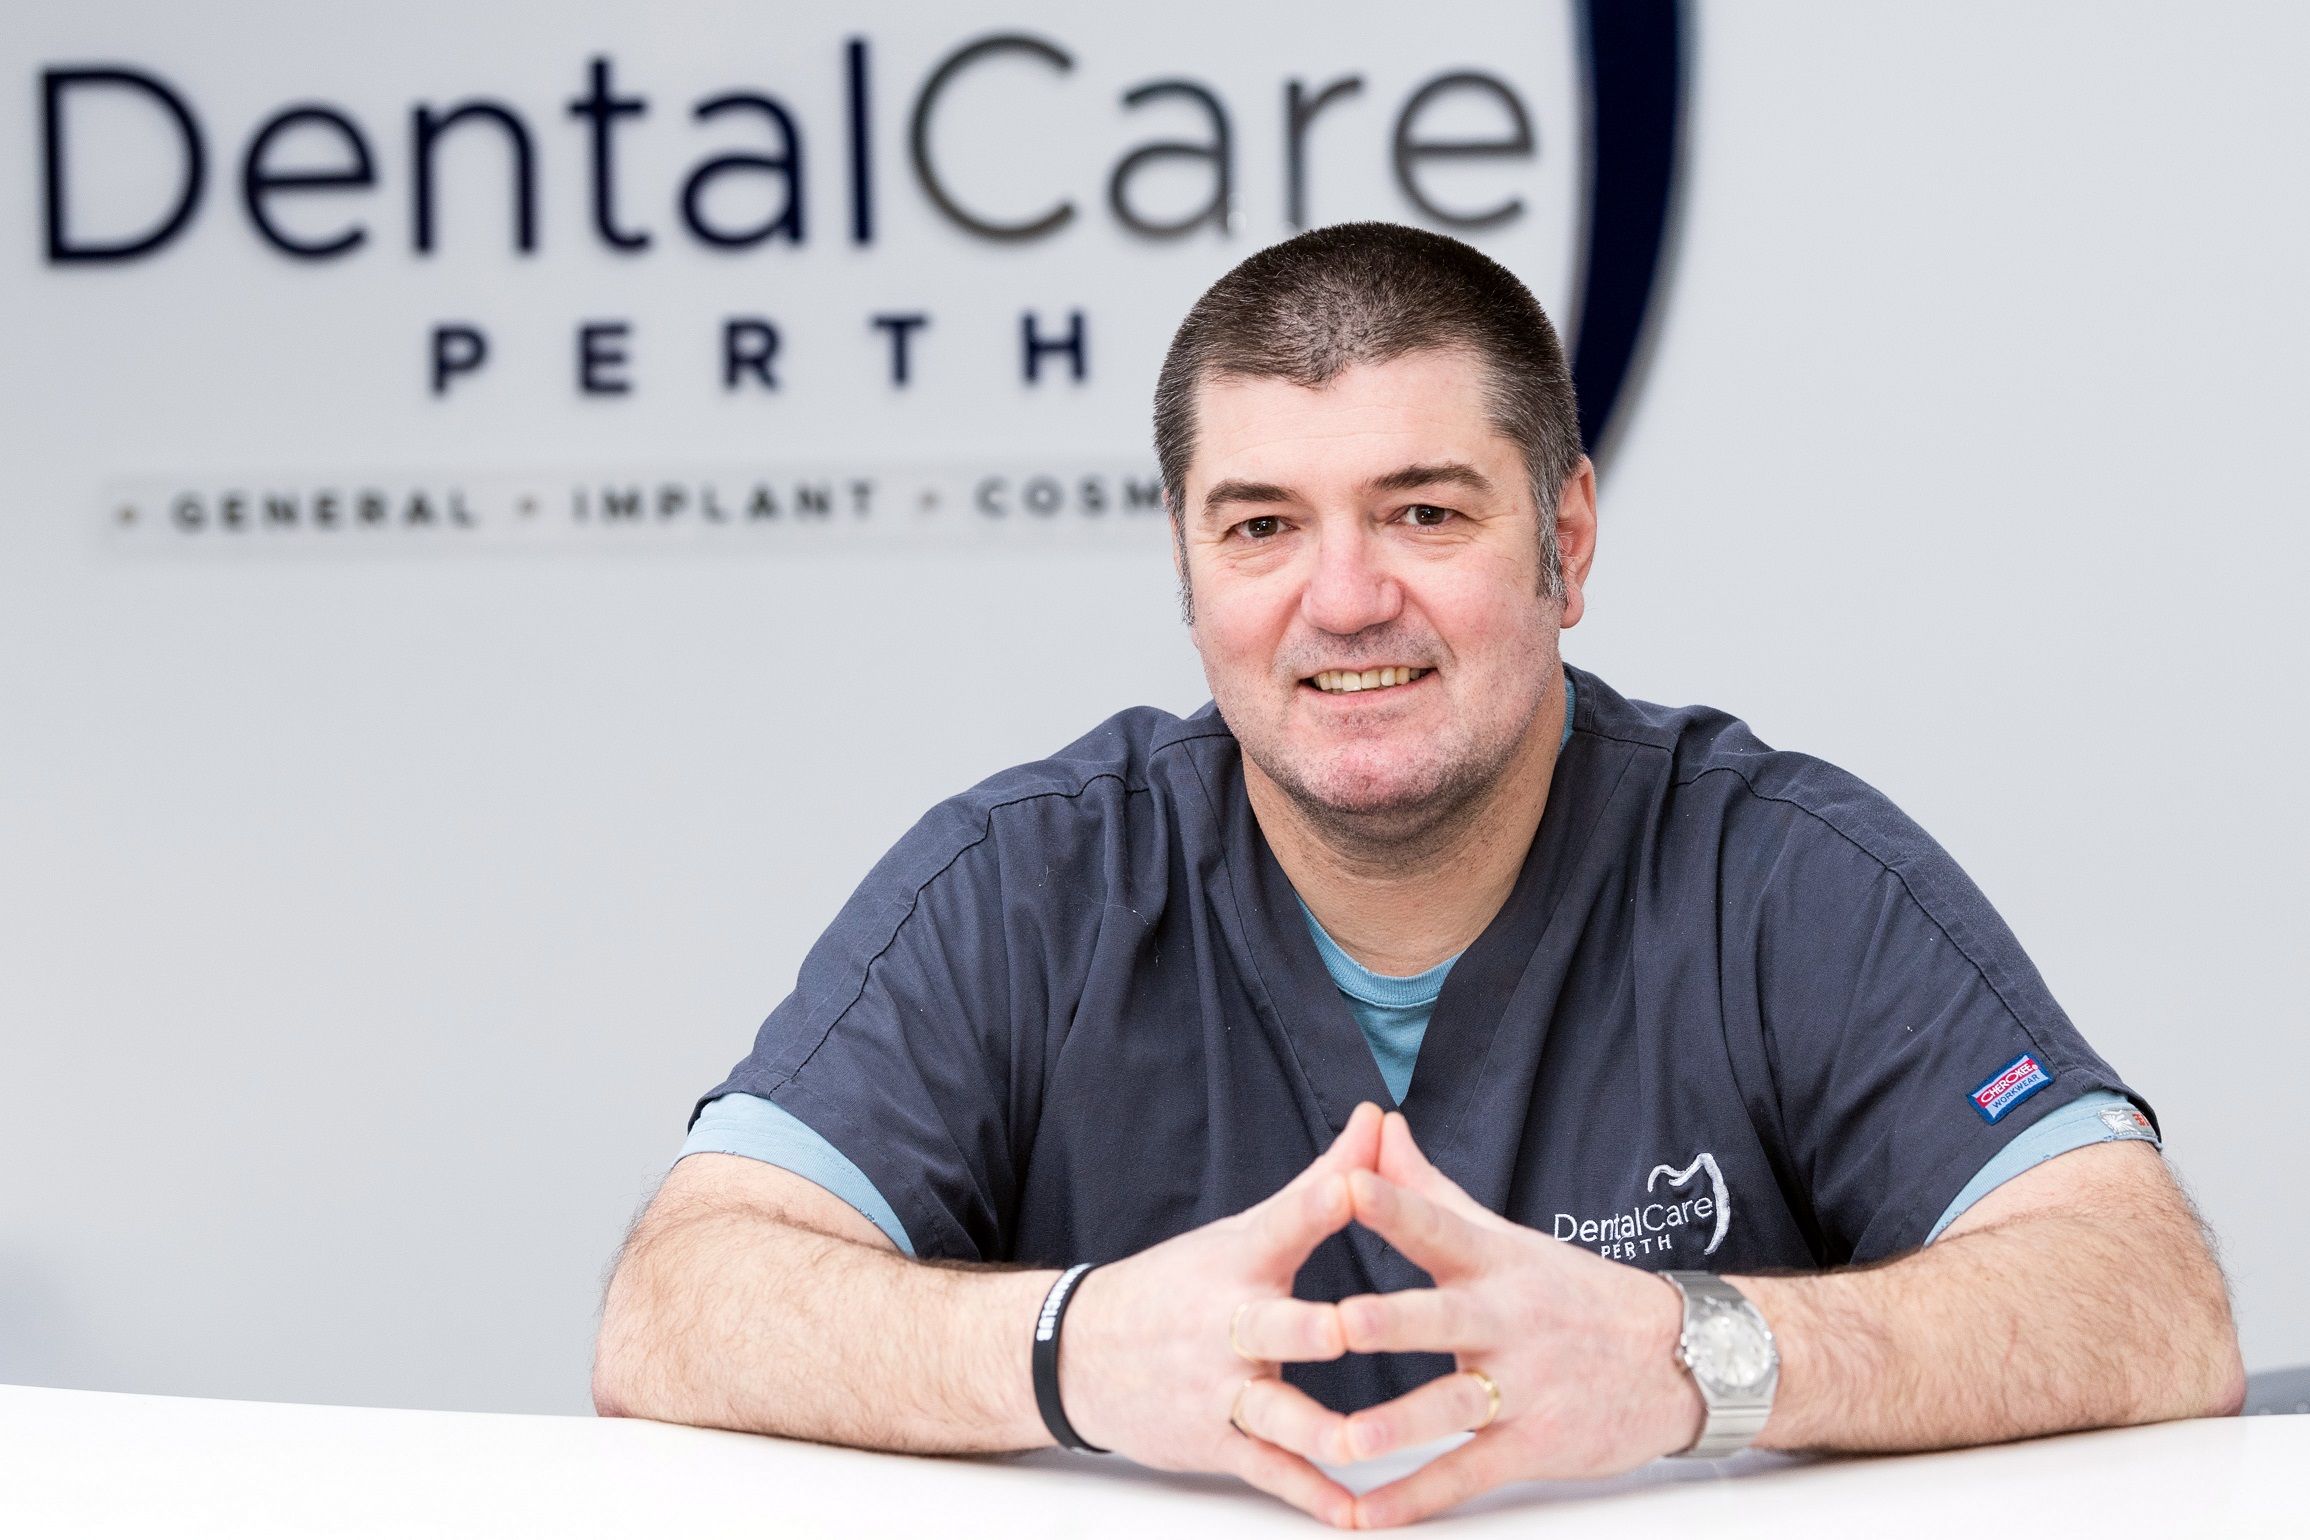 Perth dental practice secures future following takeover by Clyde Munro Dental Group